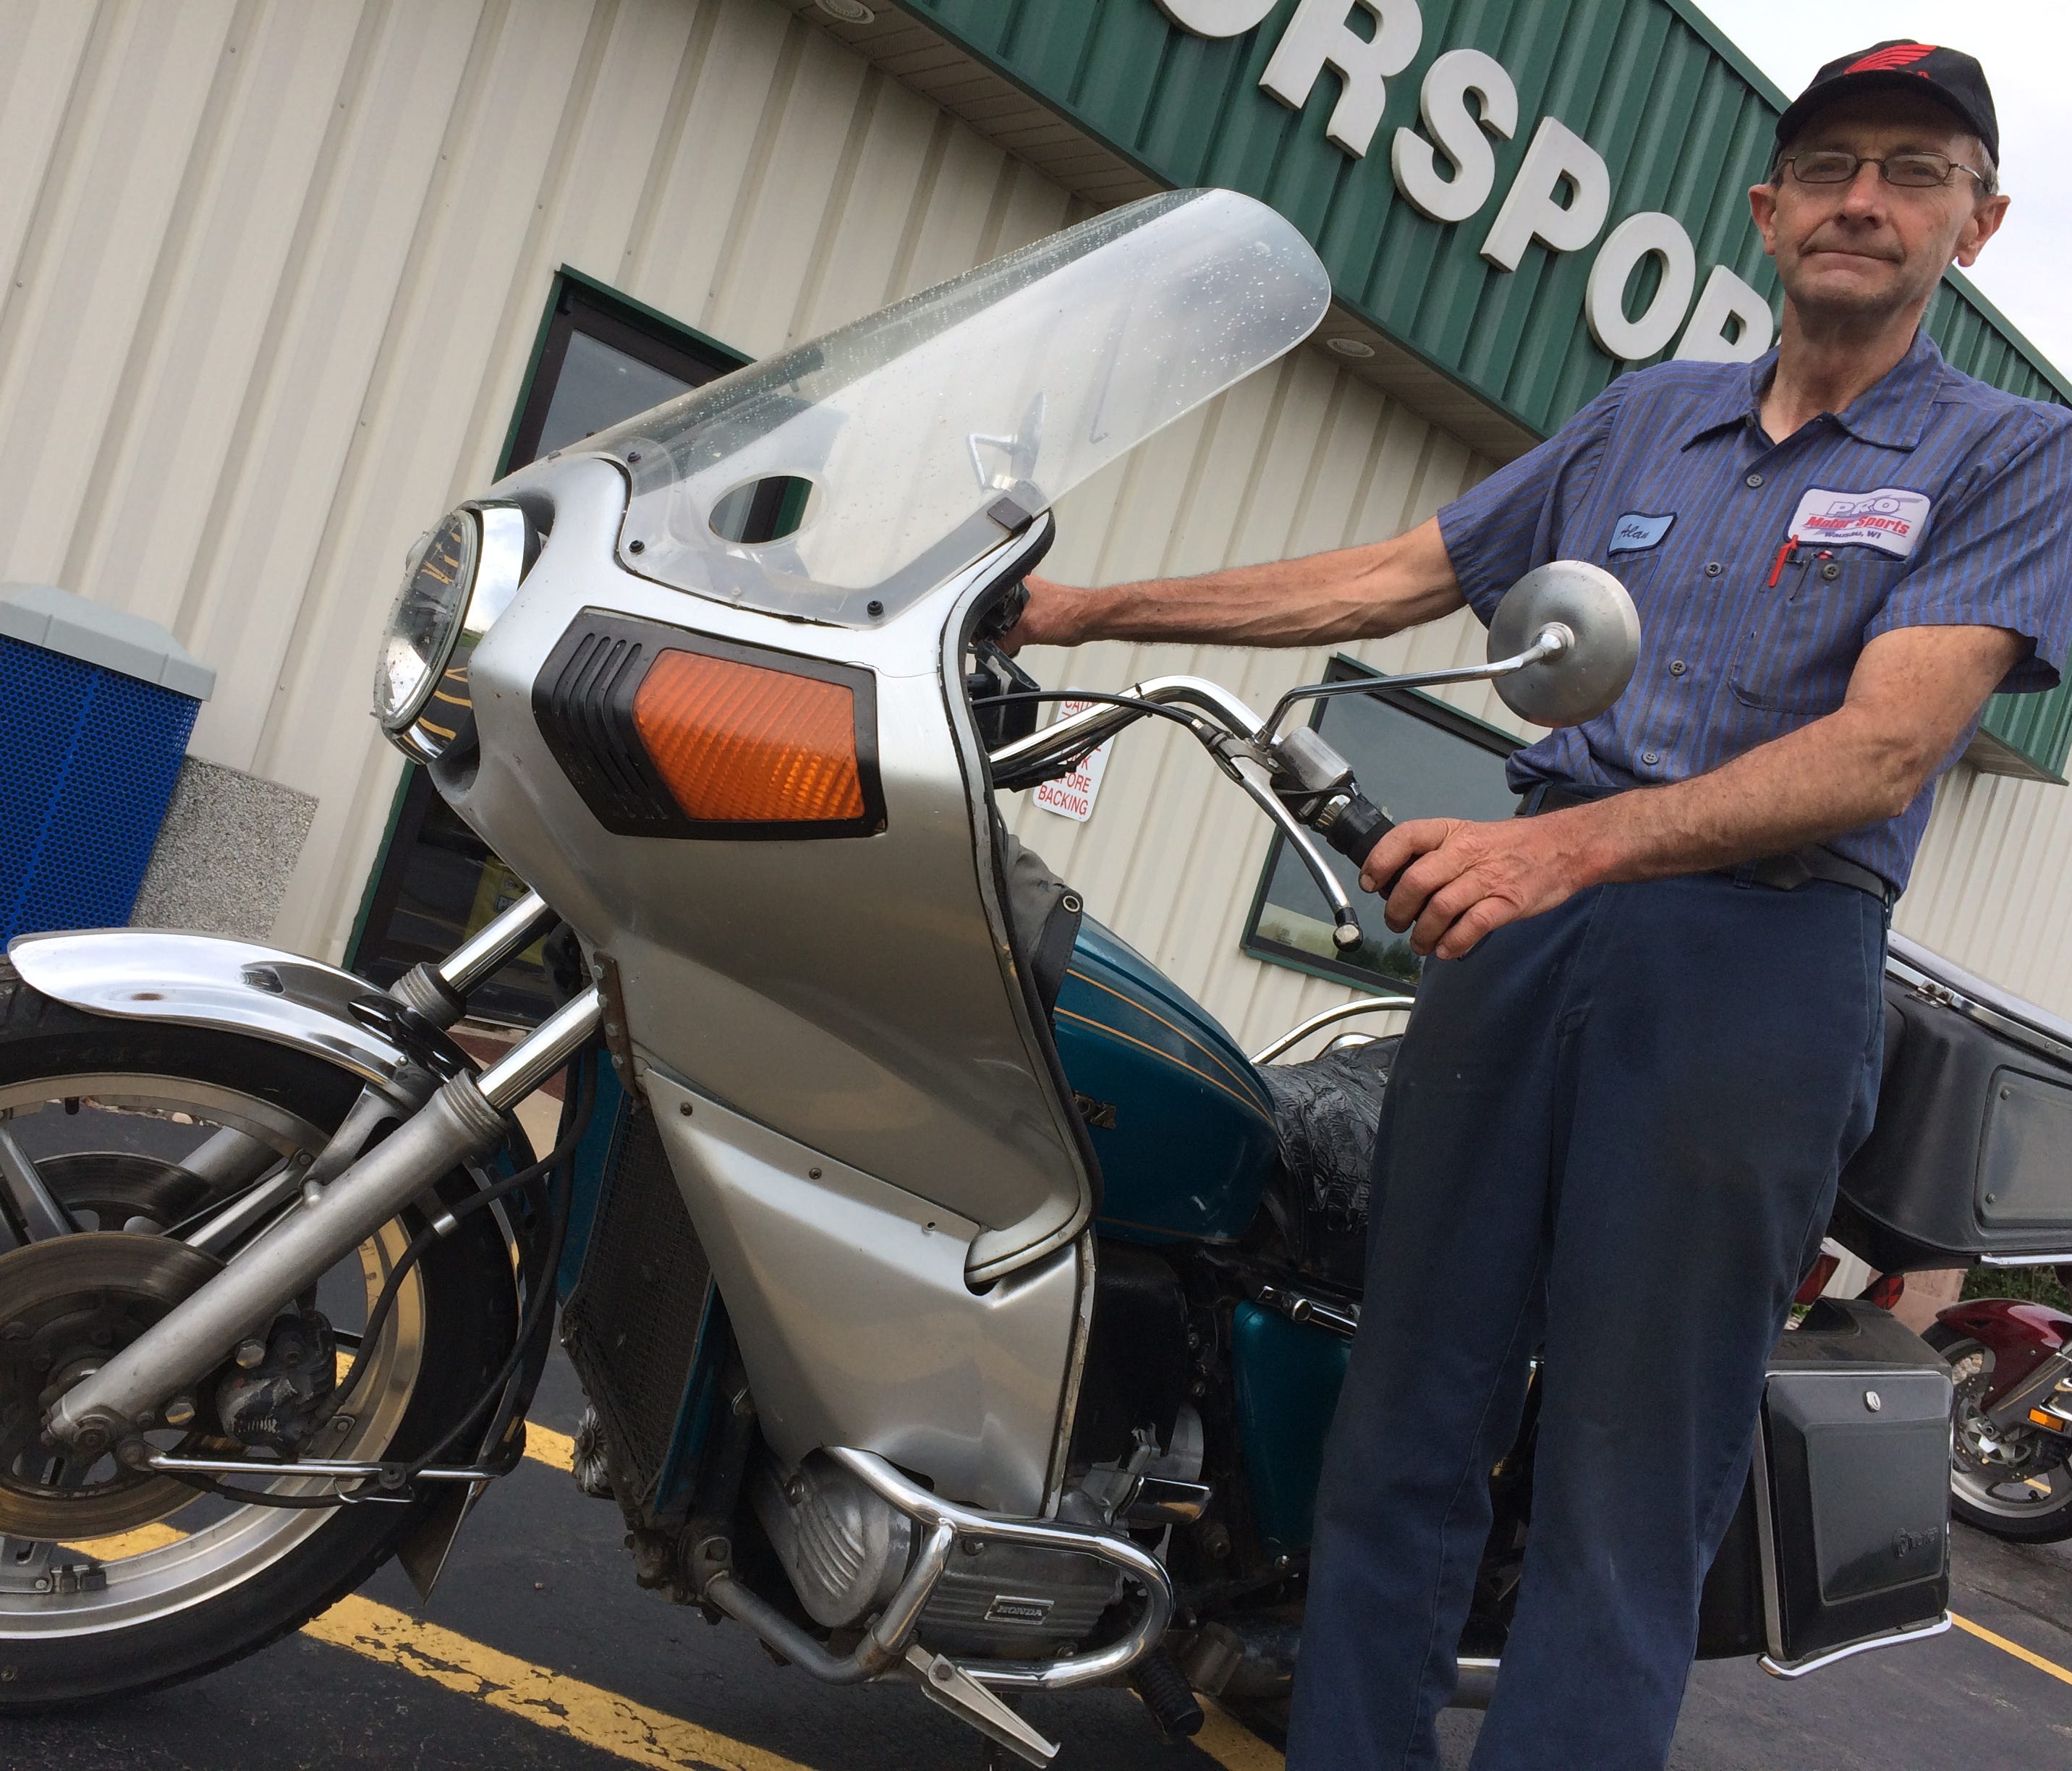 Ron Zahrt has ridden his 1975 Honda Gold Wing more than a million miles. The odometer rolled over to a million on July 29.